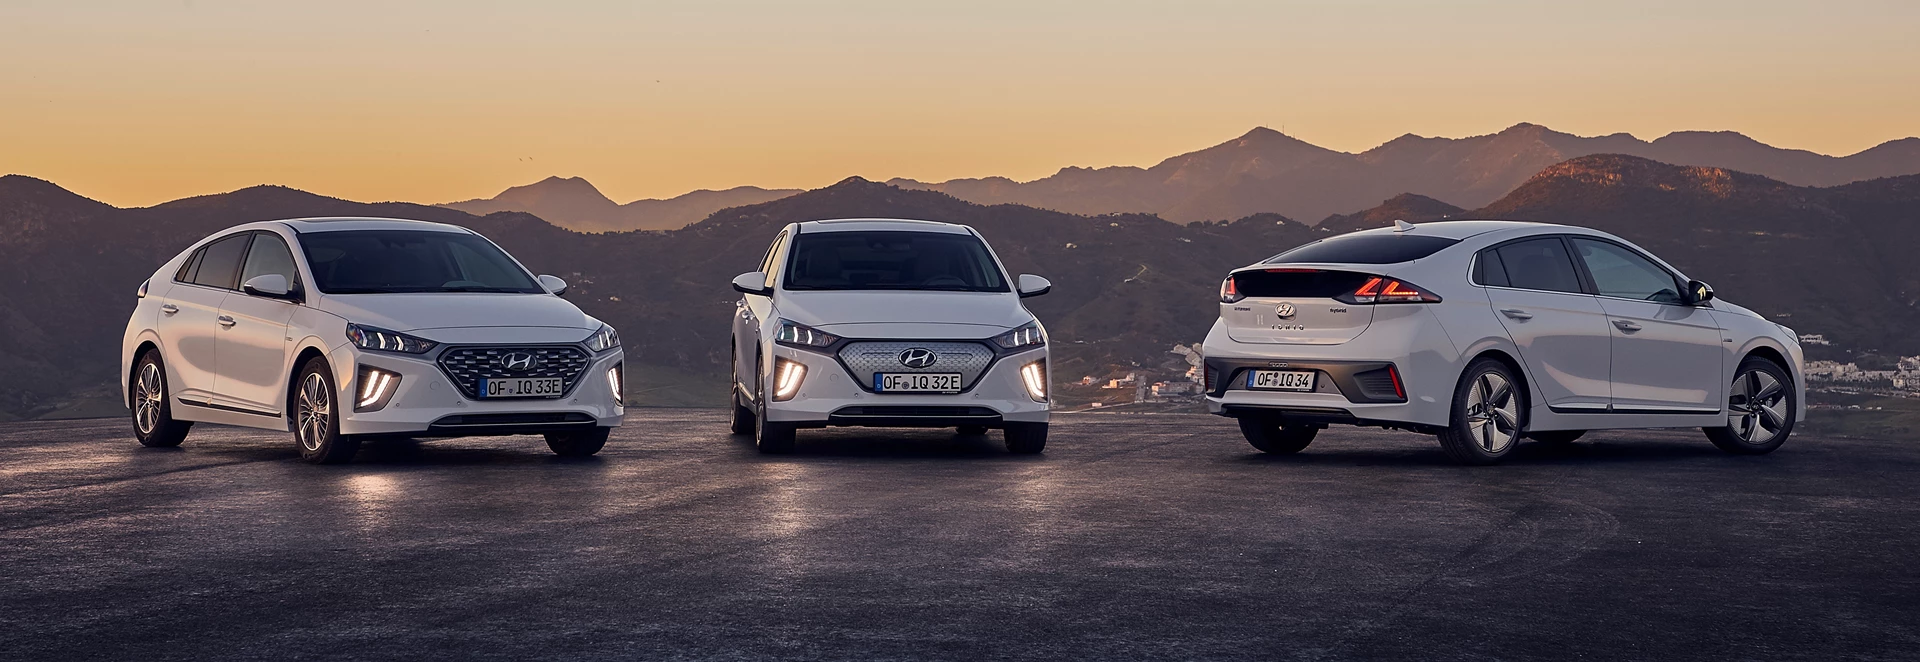 UK pricing confirmed for 2019 Hyundai IONIQ